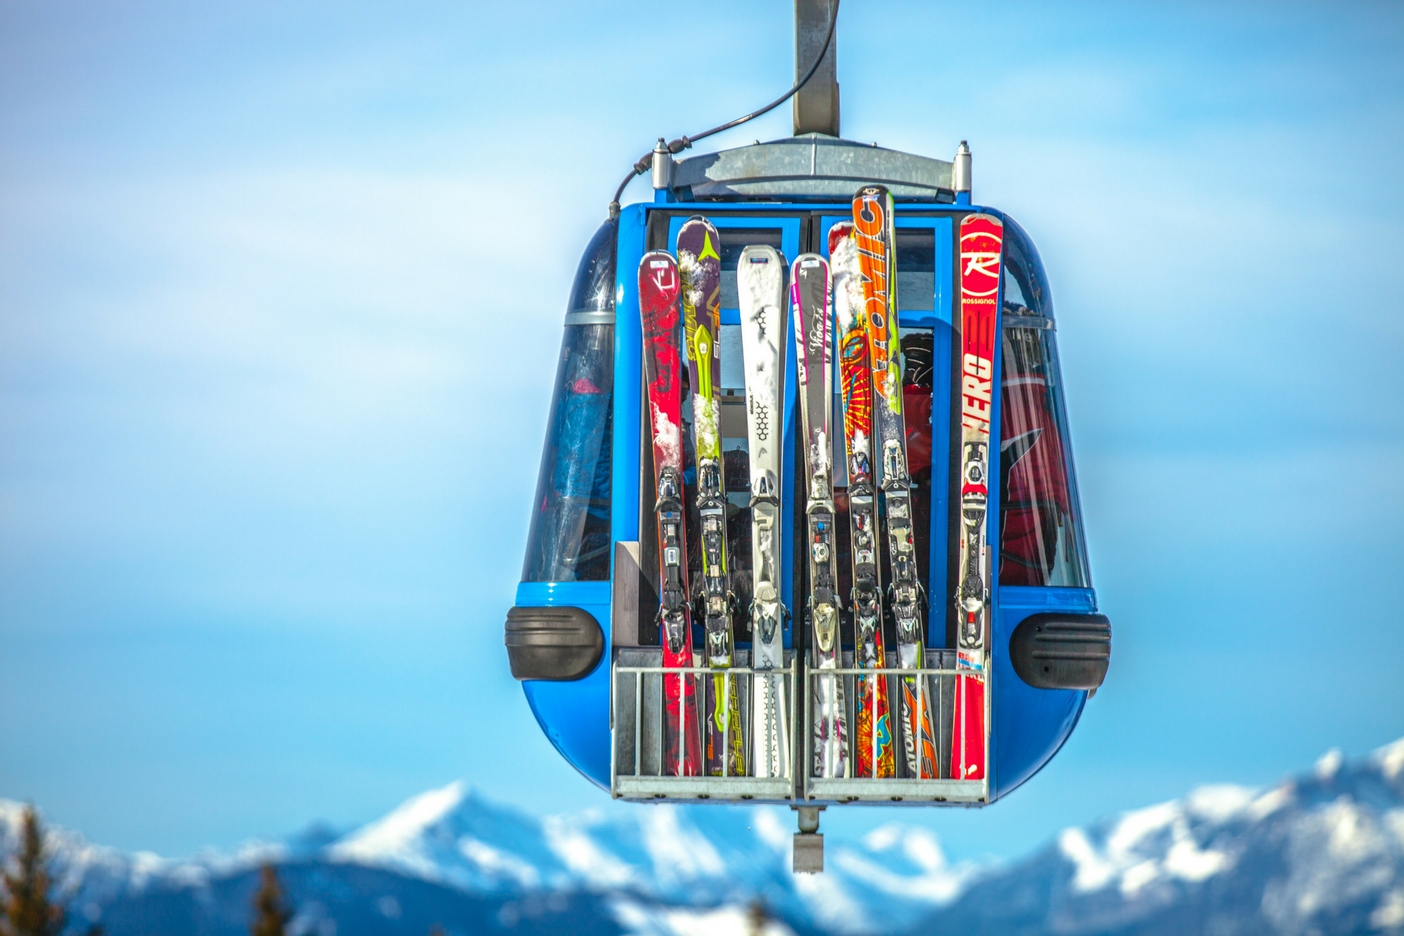 Skis attached to back of chairlift